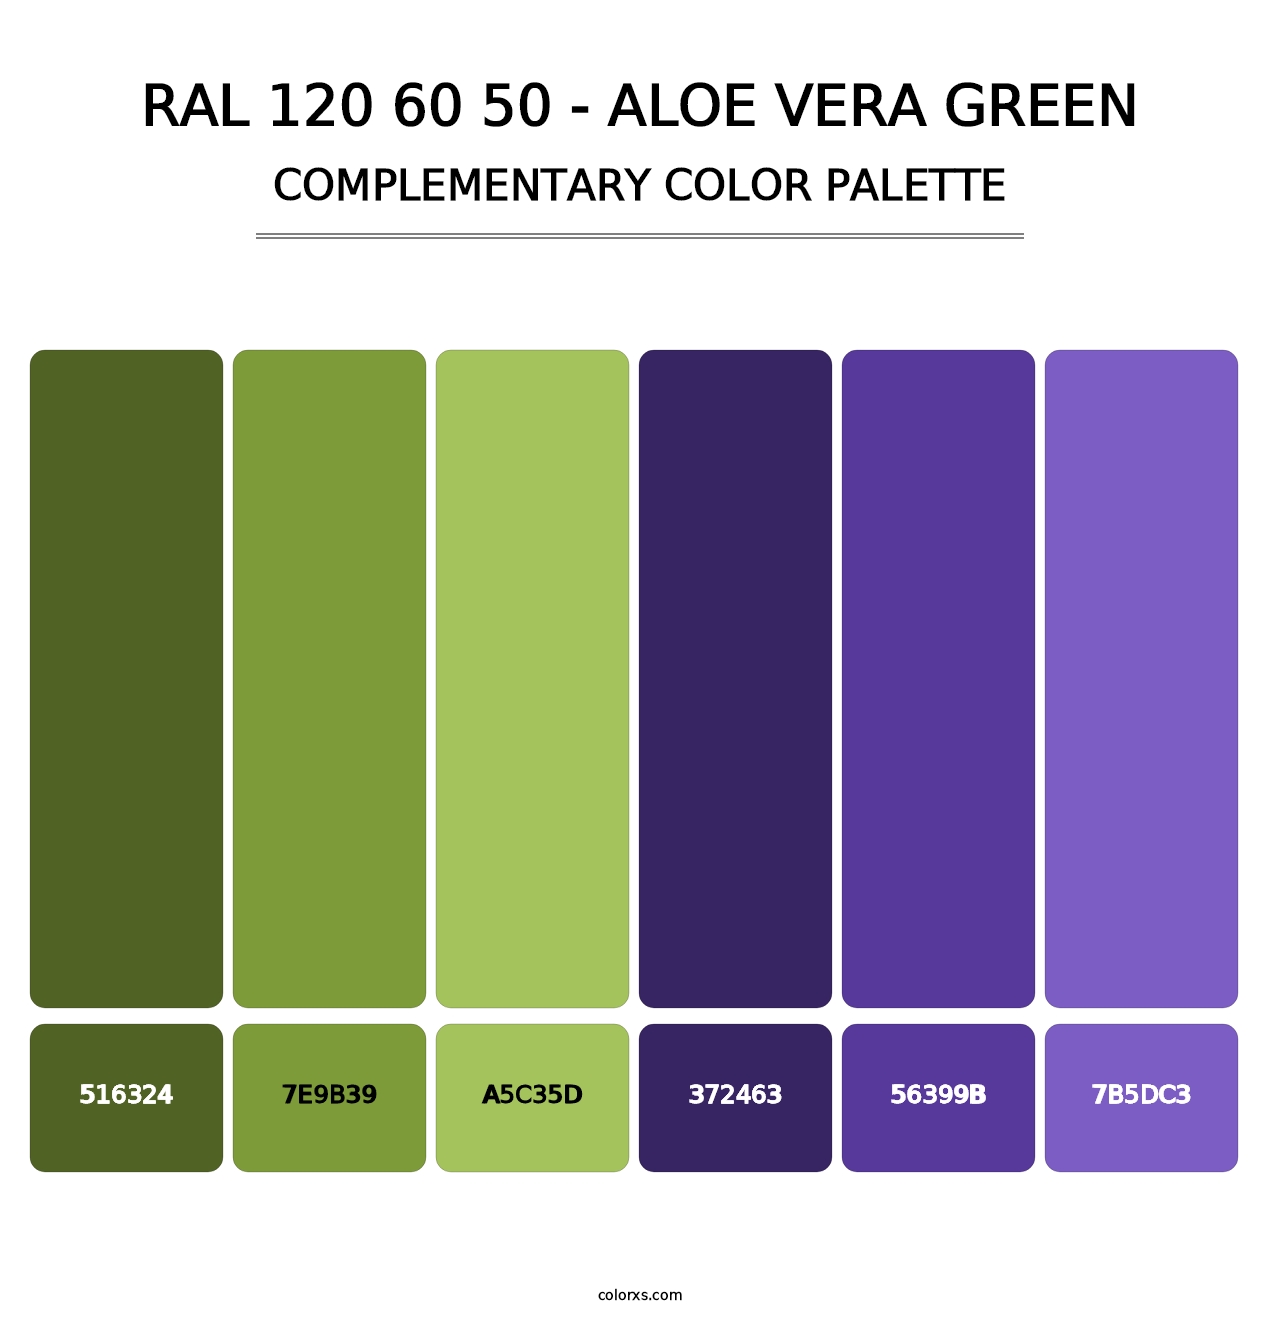 RAL 120 60 50 - Aloe Vera Green - Complementary Color Palette